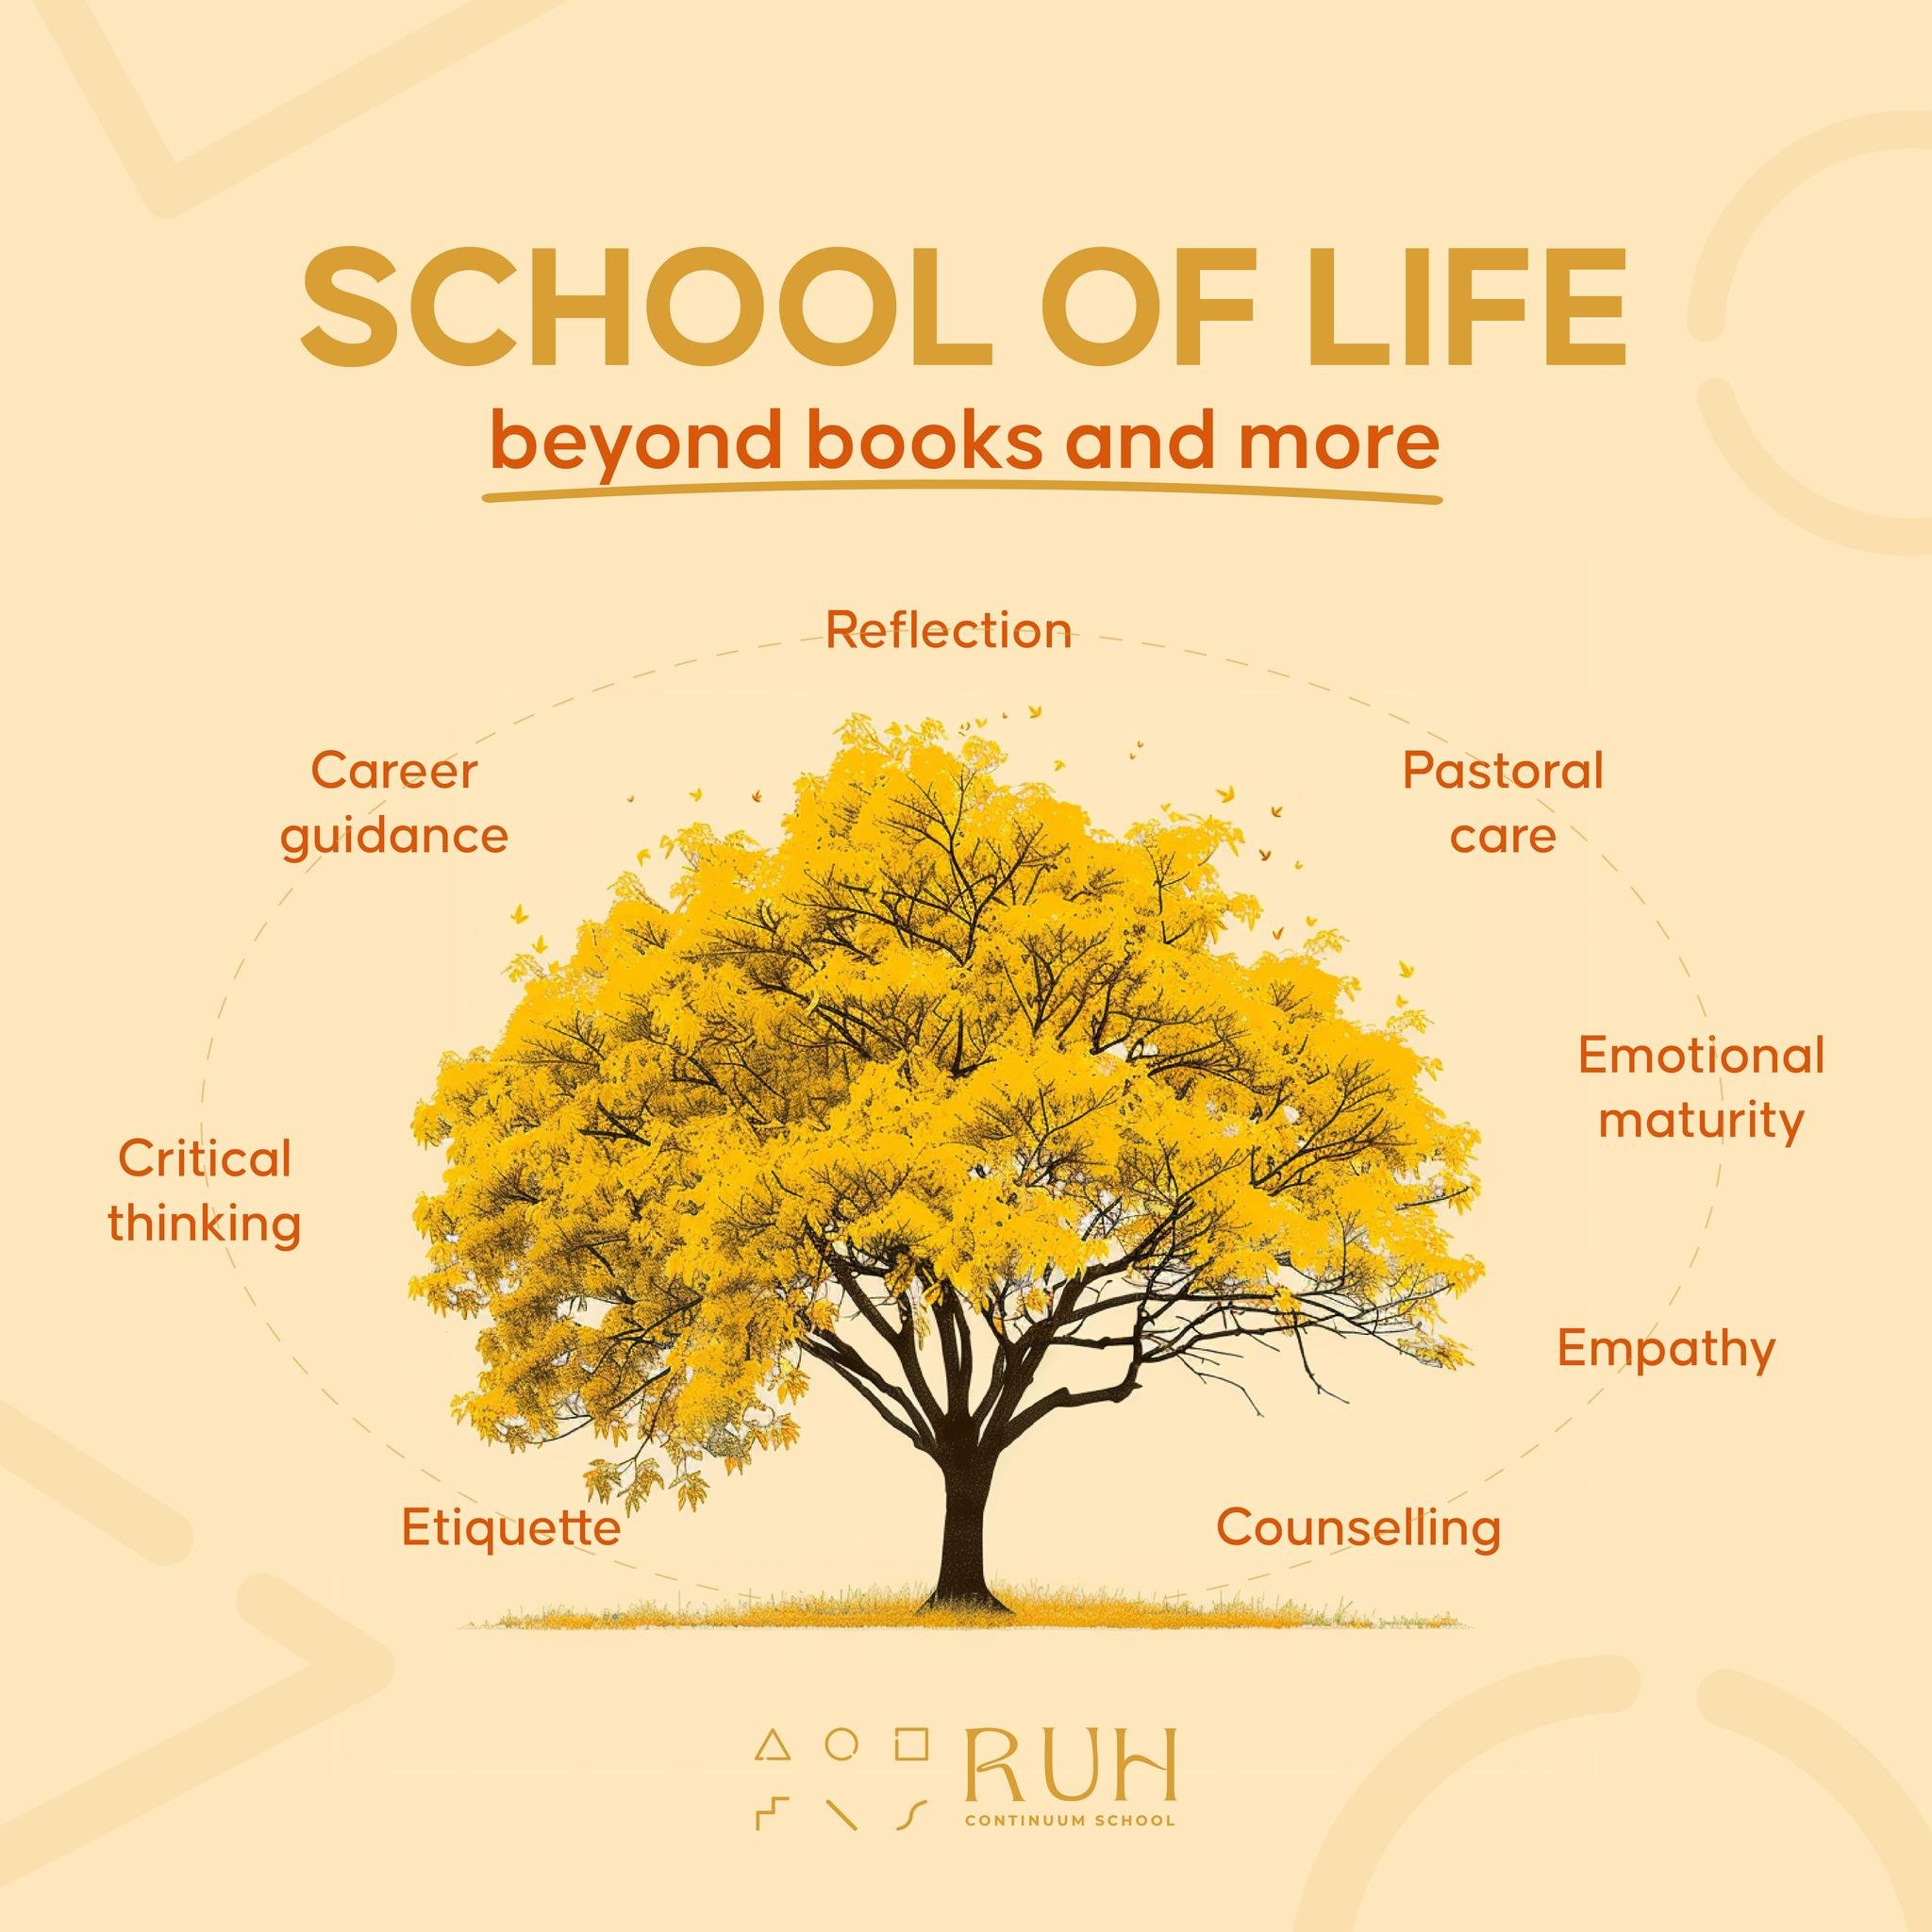 Education at Ruh Continuum is more than just knowledge&mdash;it's about building character and life skills. 🌱💼

Our holistic approach extends beyond textbooks to cultivate crucial life skills so join us in shaping tomorrow's leaders equipped for su